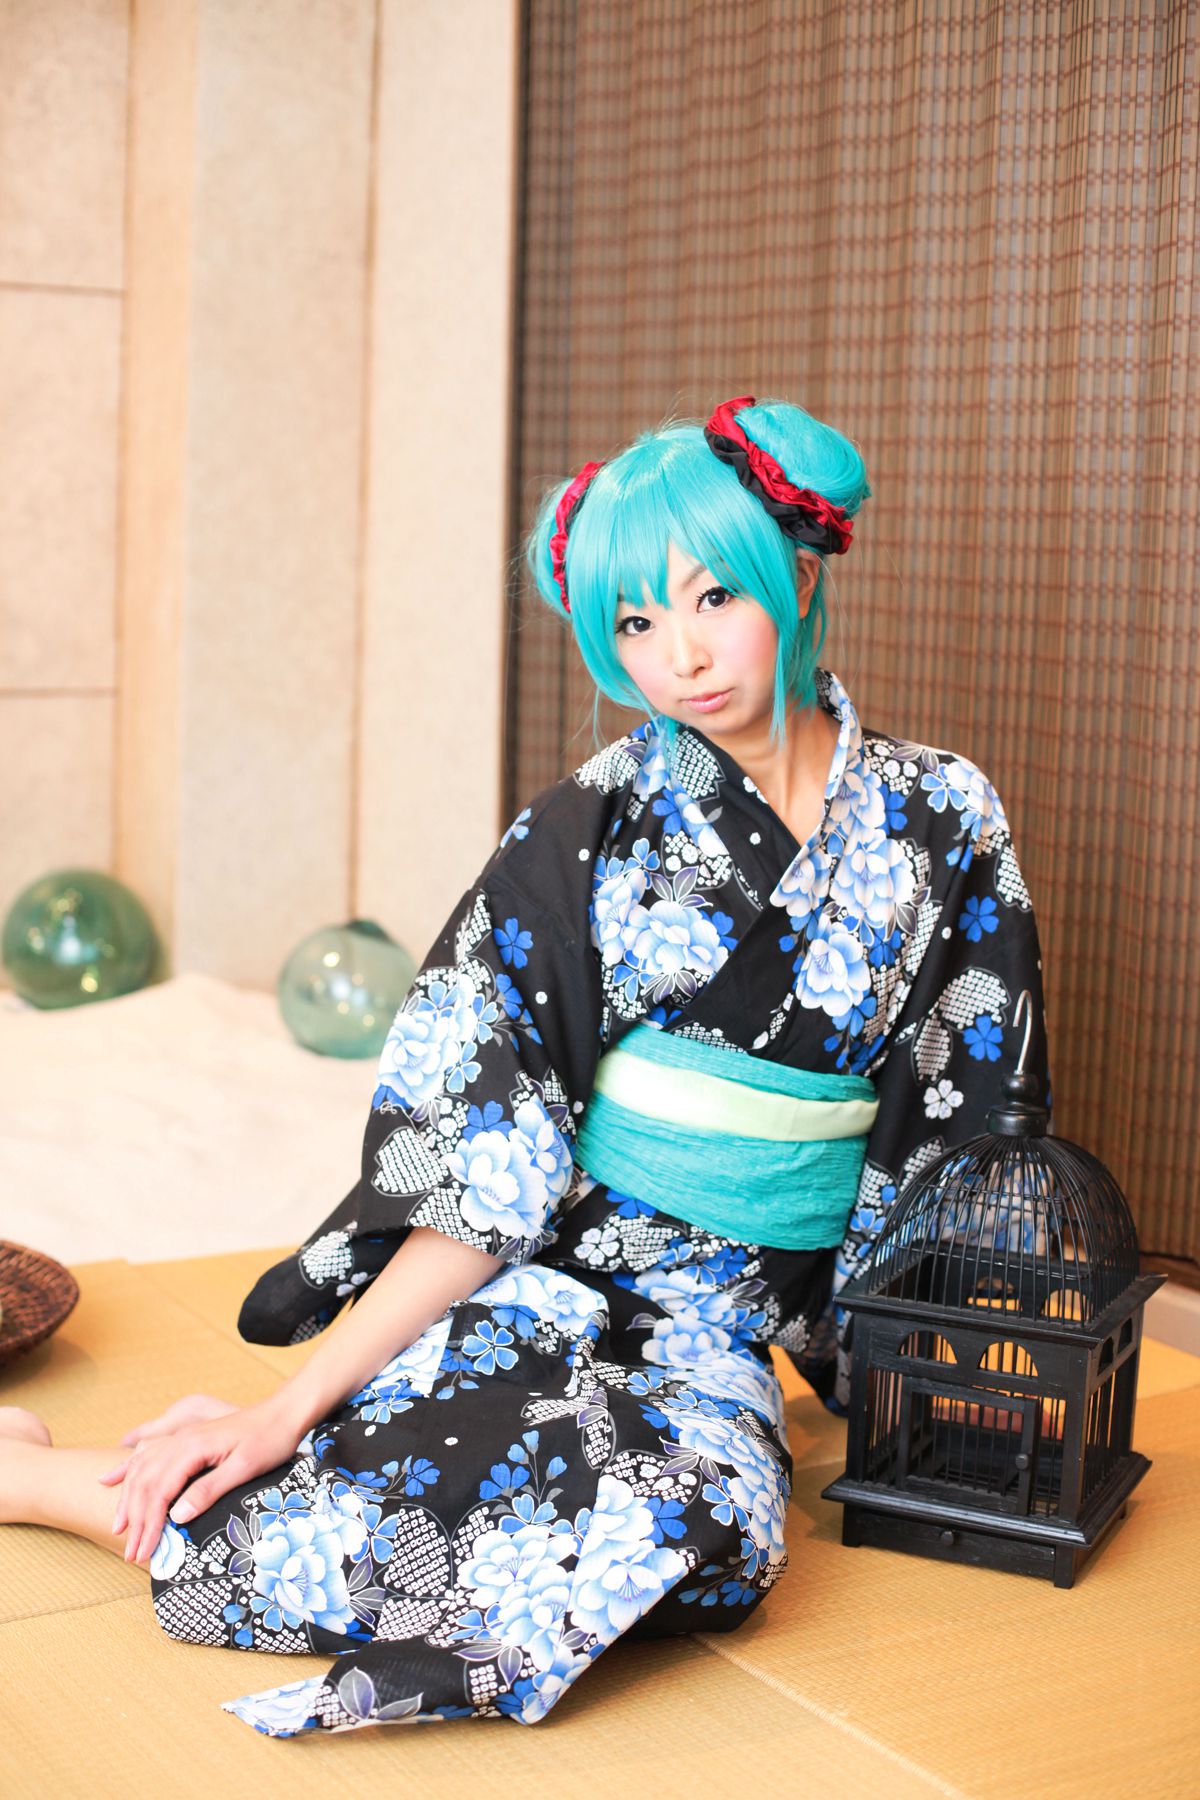 taotuhome[Cosplay] Necoco as Hatsune Miku from Vocaloid 套图第93张